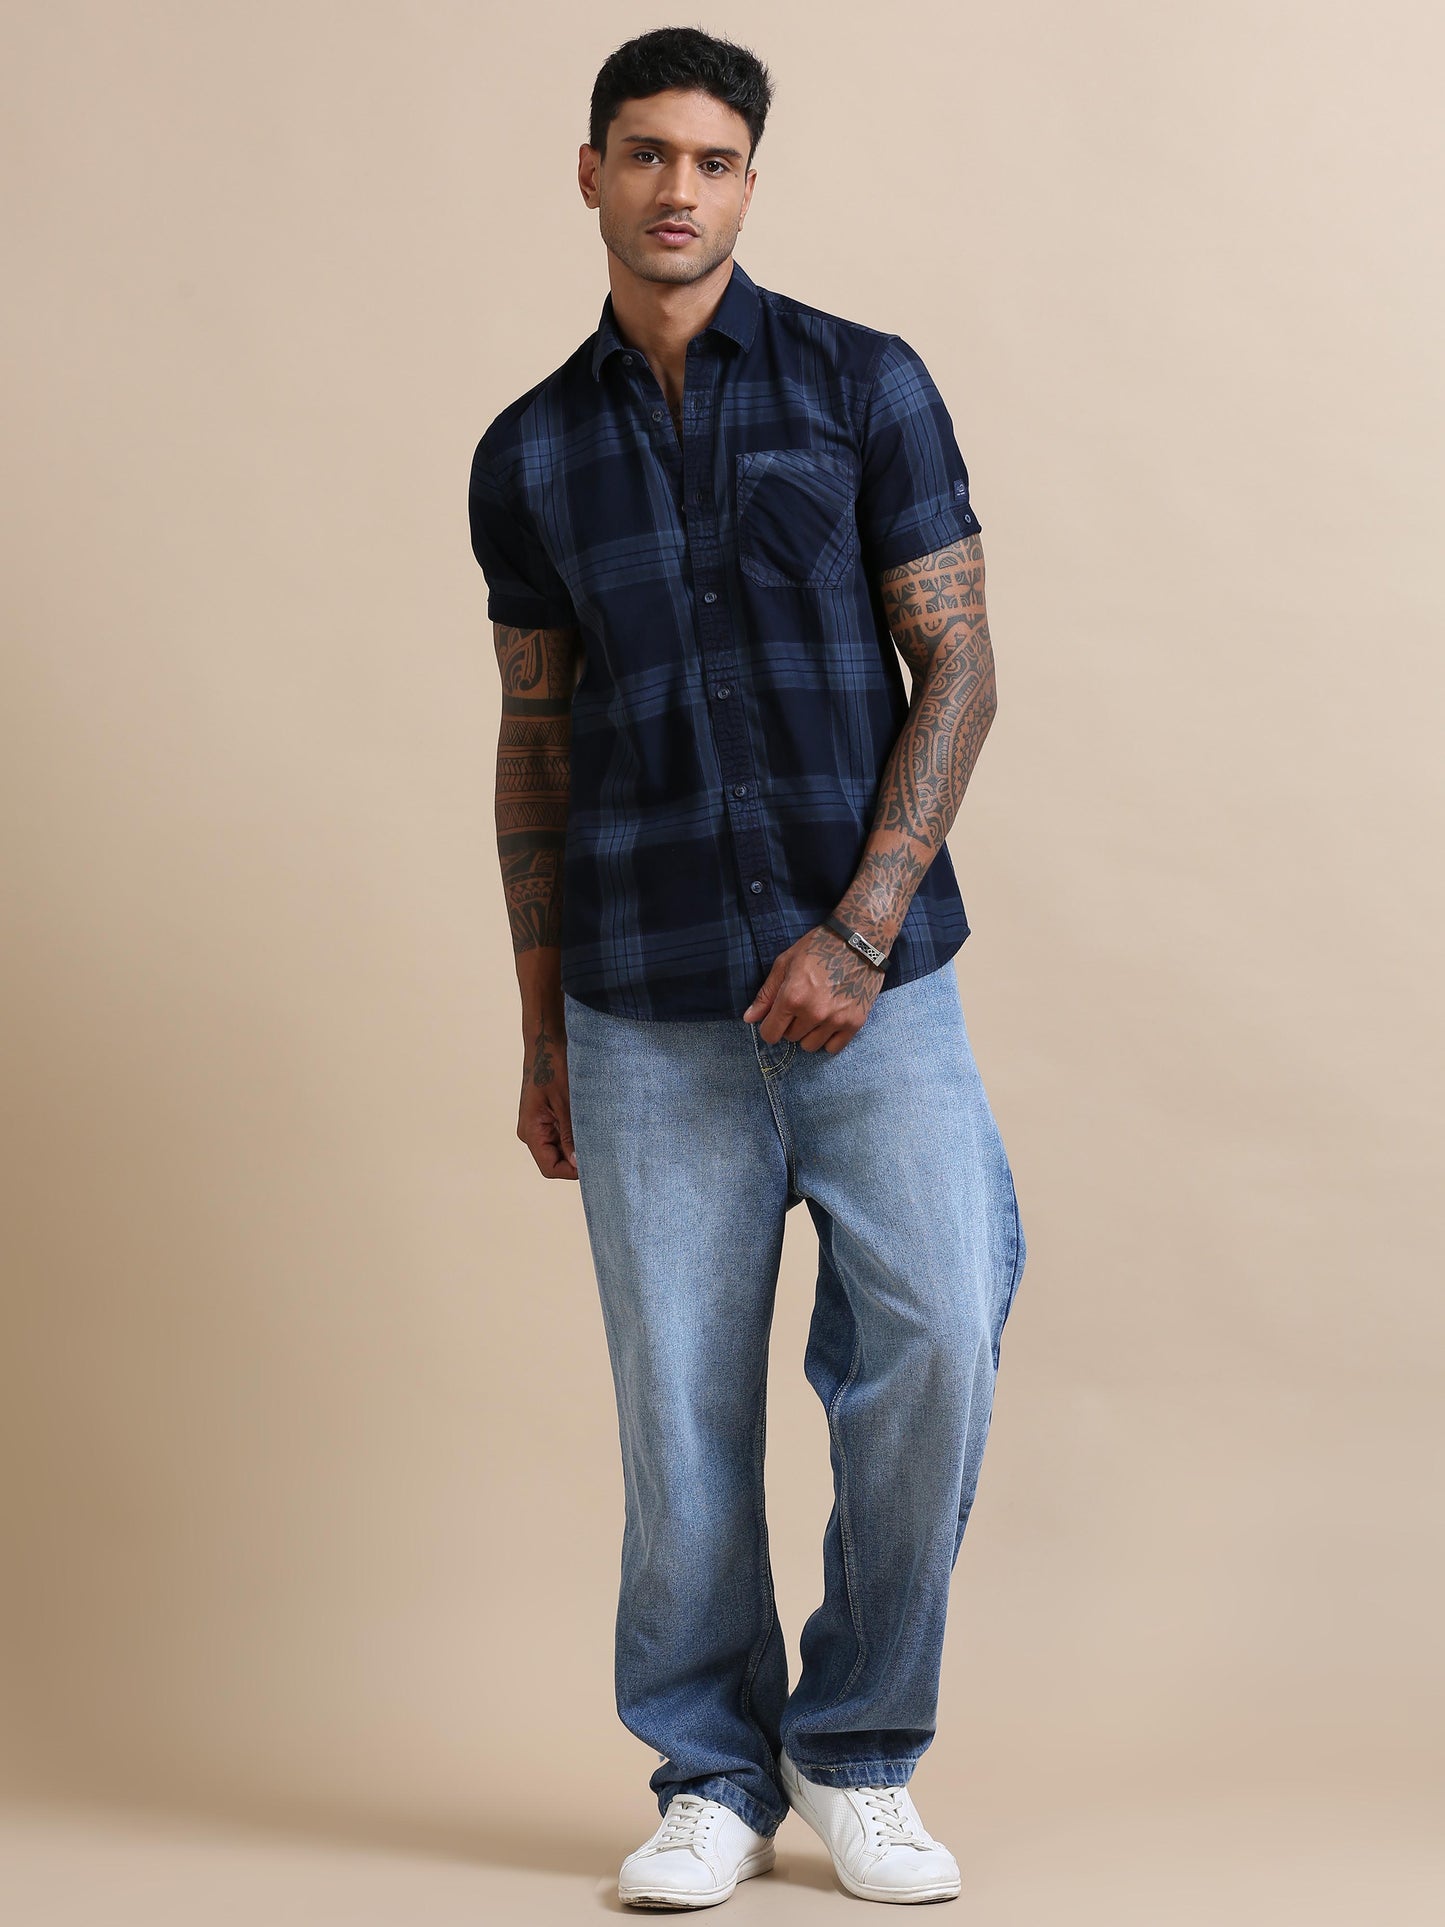 Lineage Blue And Black Check Shirt Half Sleeves for Men 